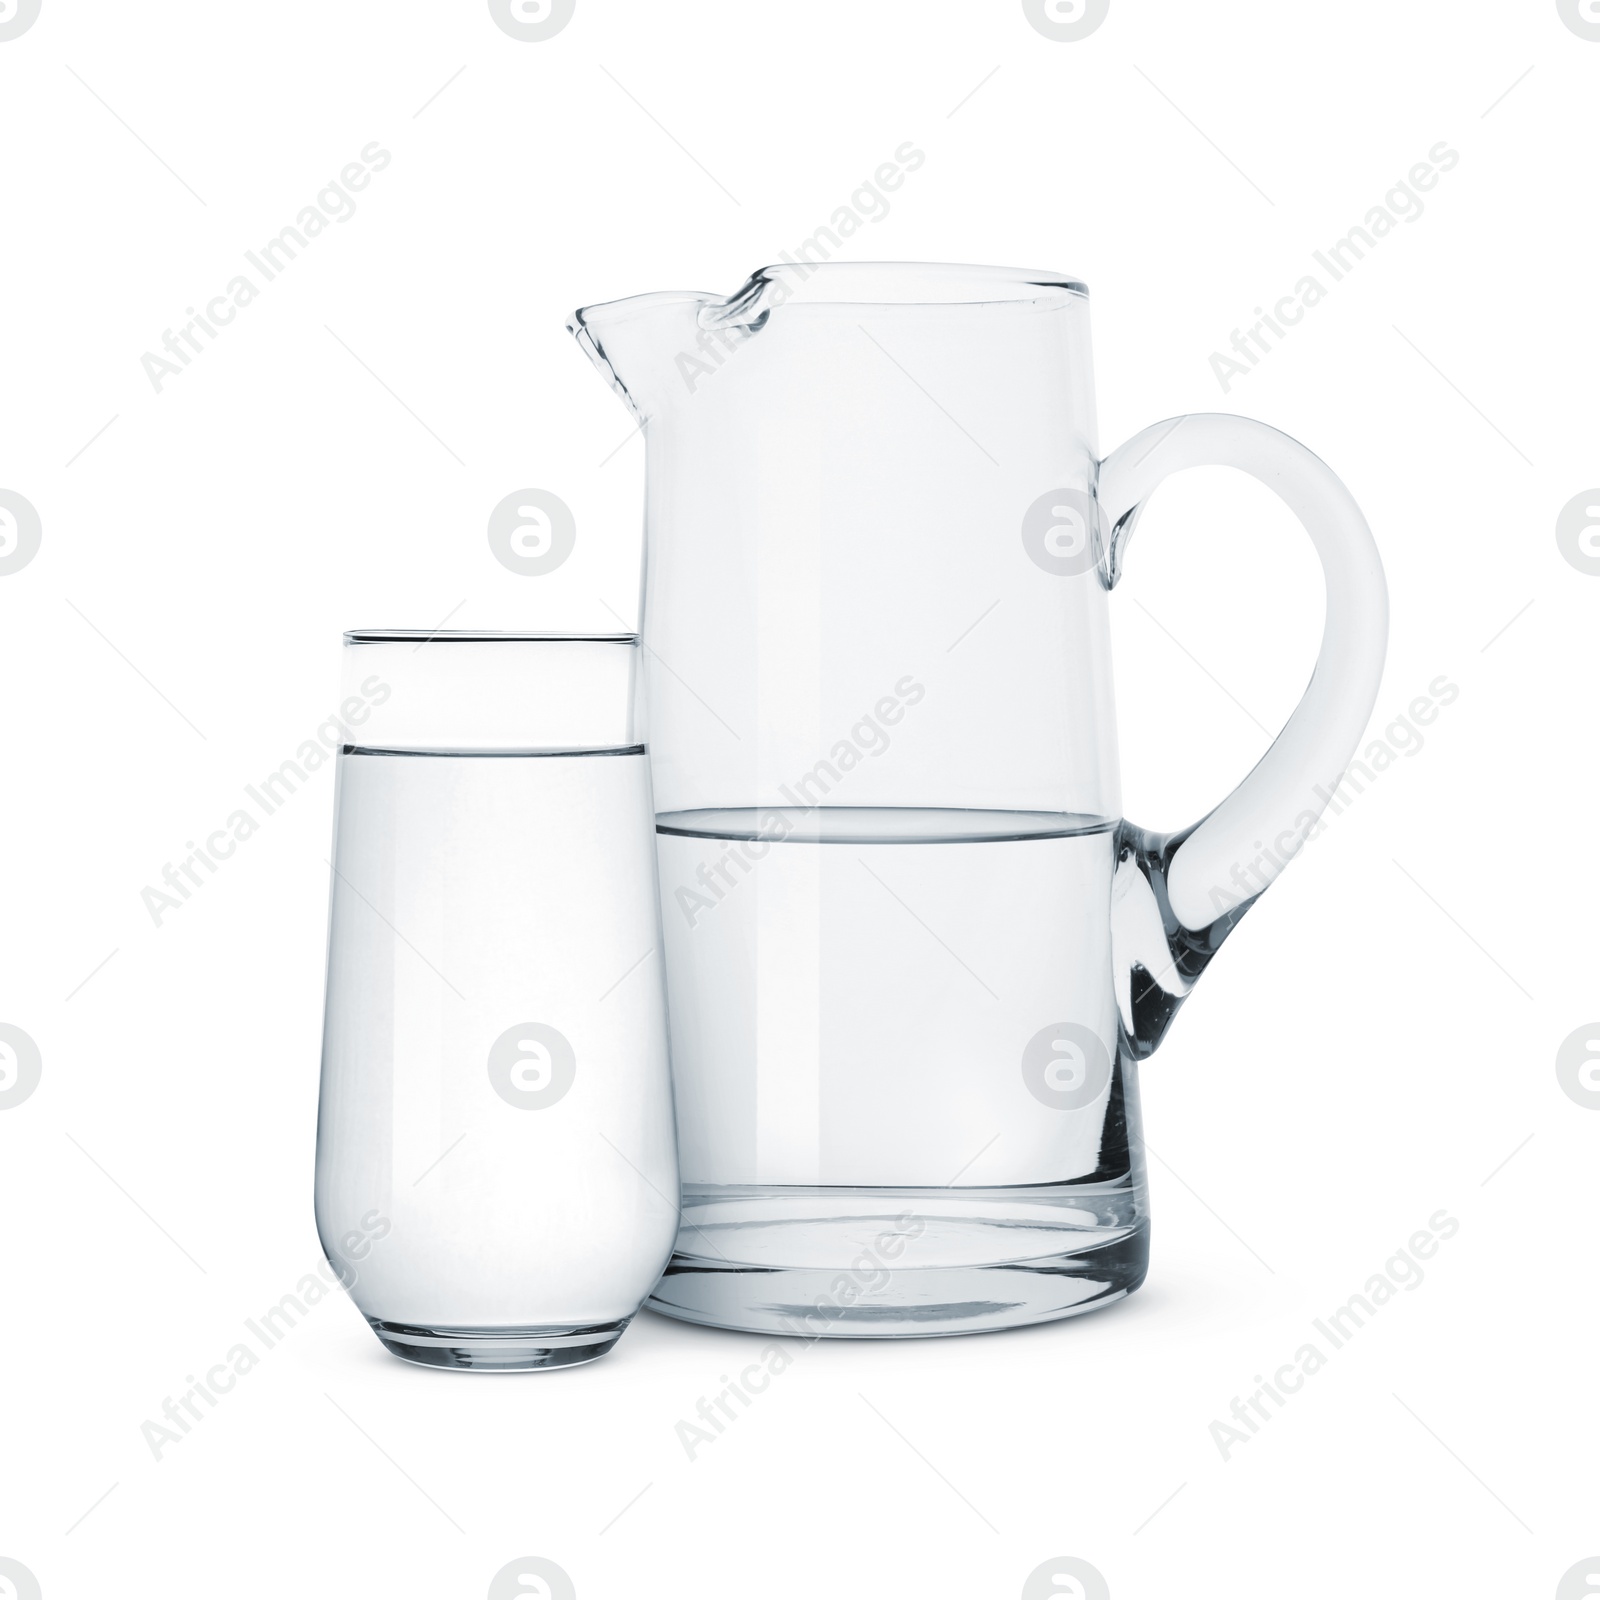 Image of Glass and jug with water isolated on white